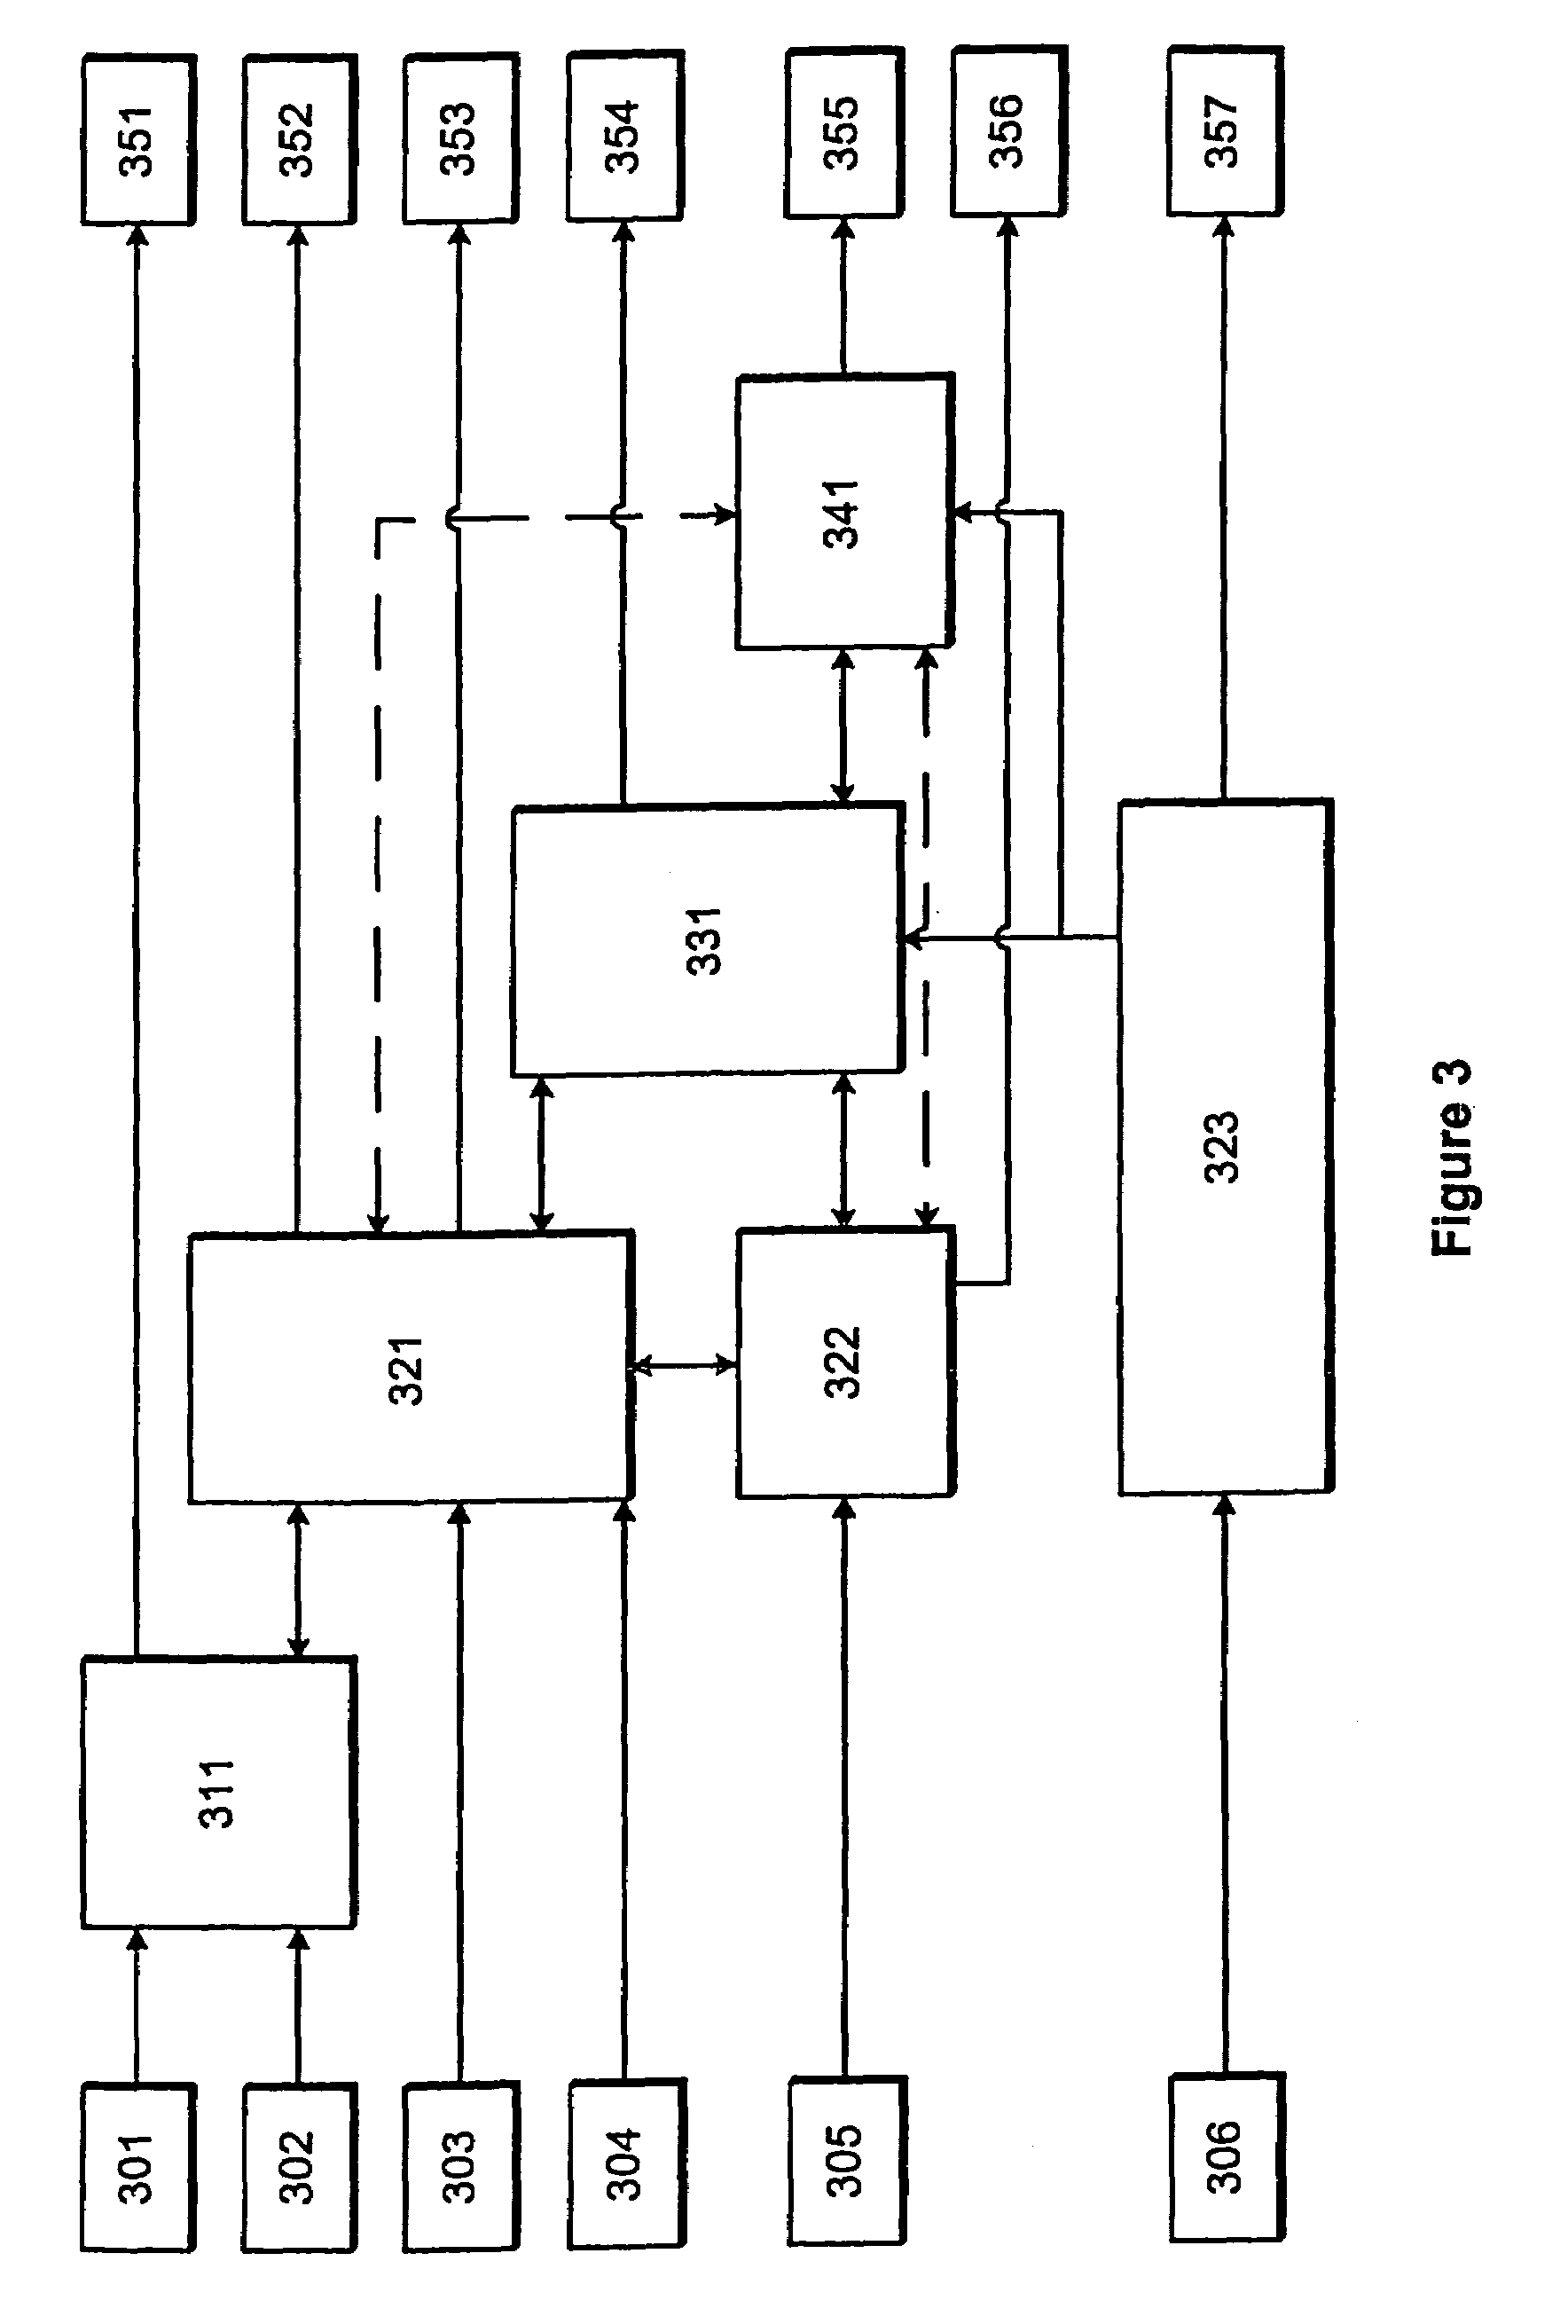 Method and apparatus for planning analysis